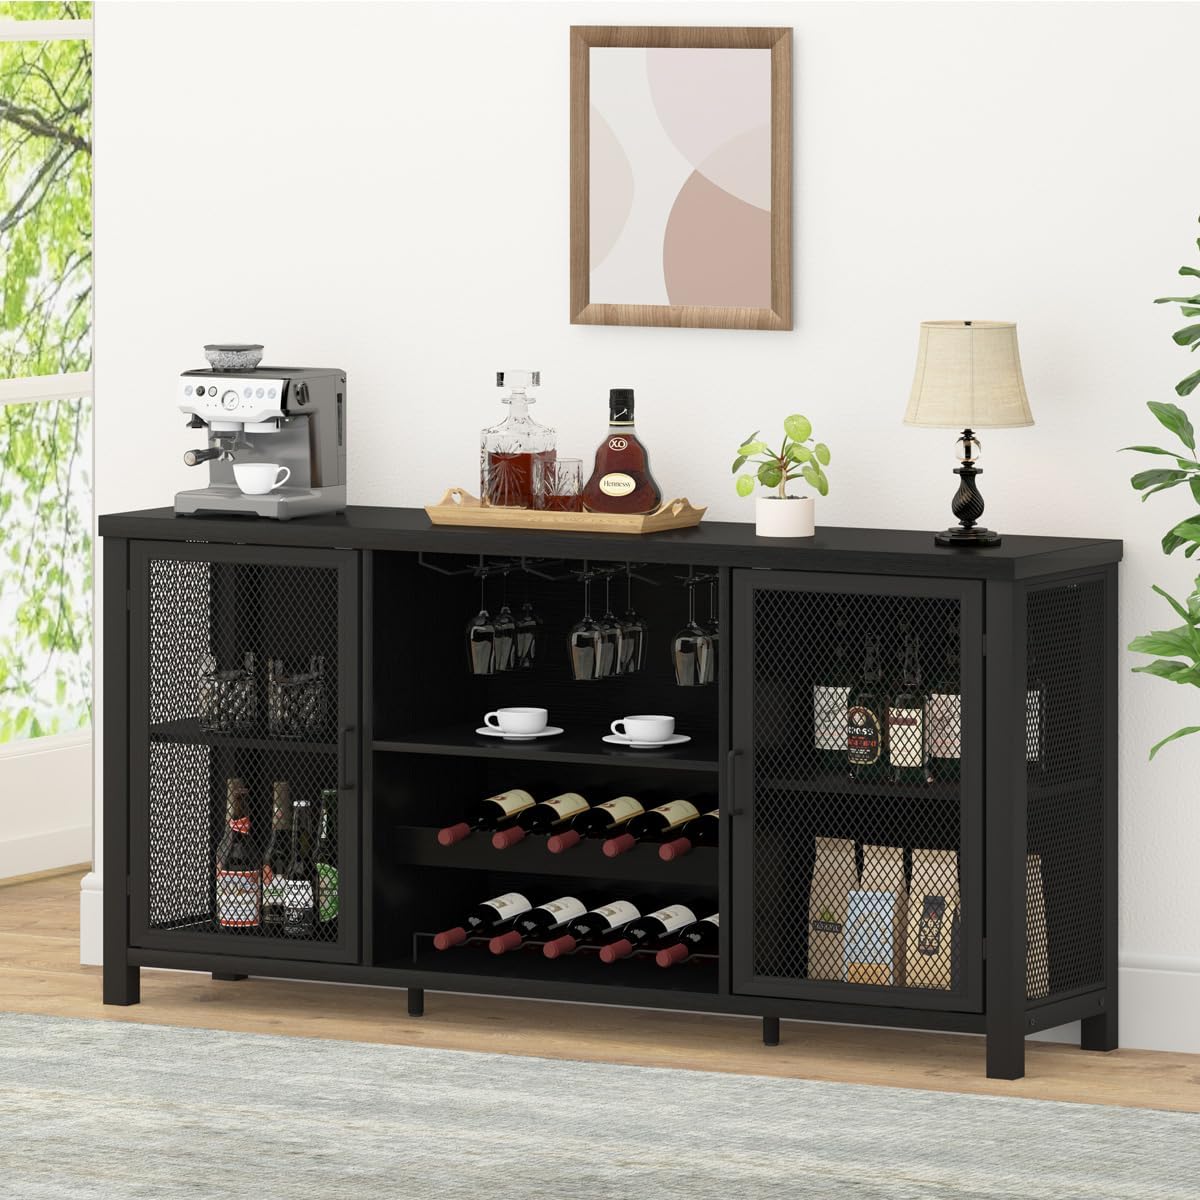 Black Wine Bar Cabinet, Coffee Bar Cabinet with Storage, Farmhouse Kitchen Buffet Cabinet with Rack for Liquor and Coffee, Industrial Wine Cabinet for Home Living Dining Room, Black Oak, 55 In